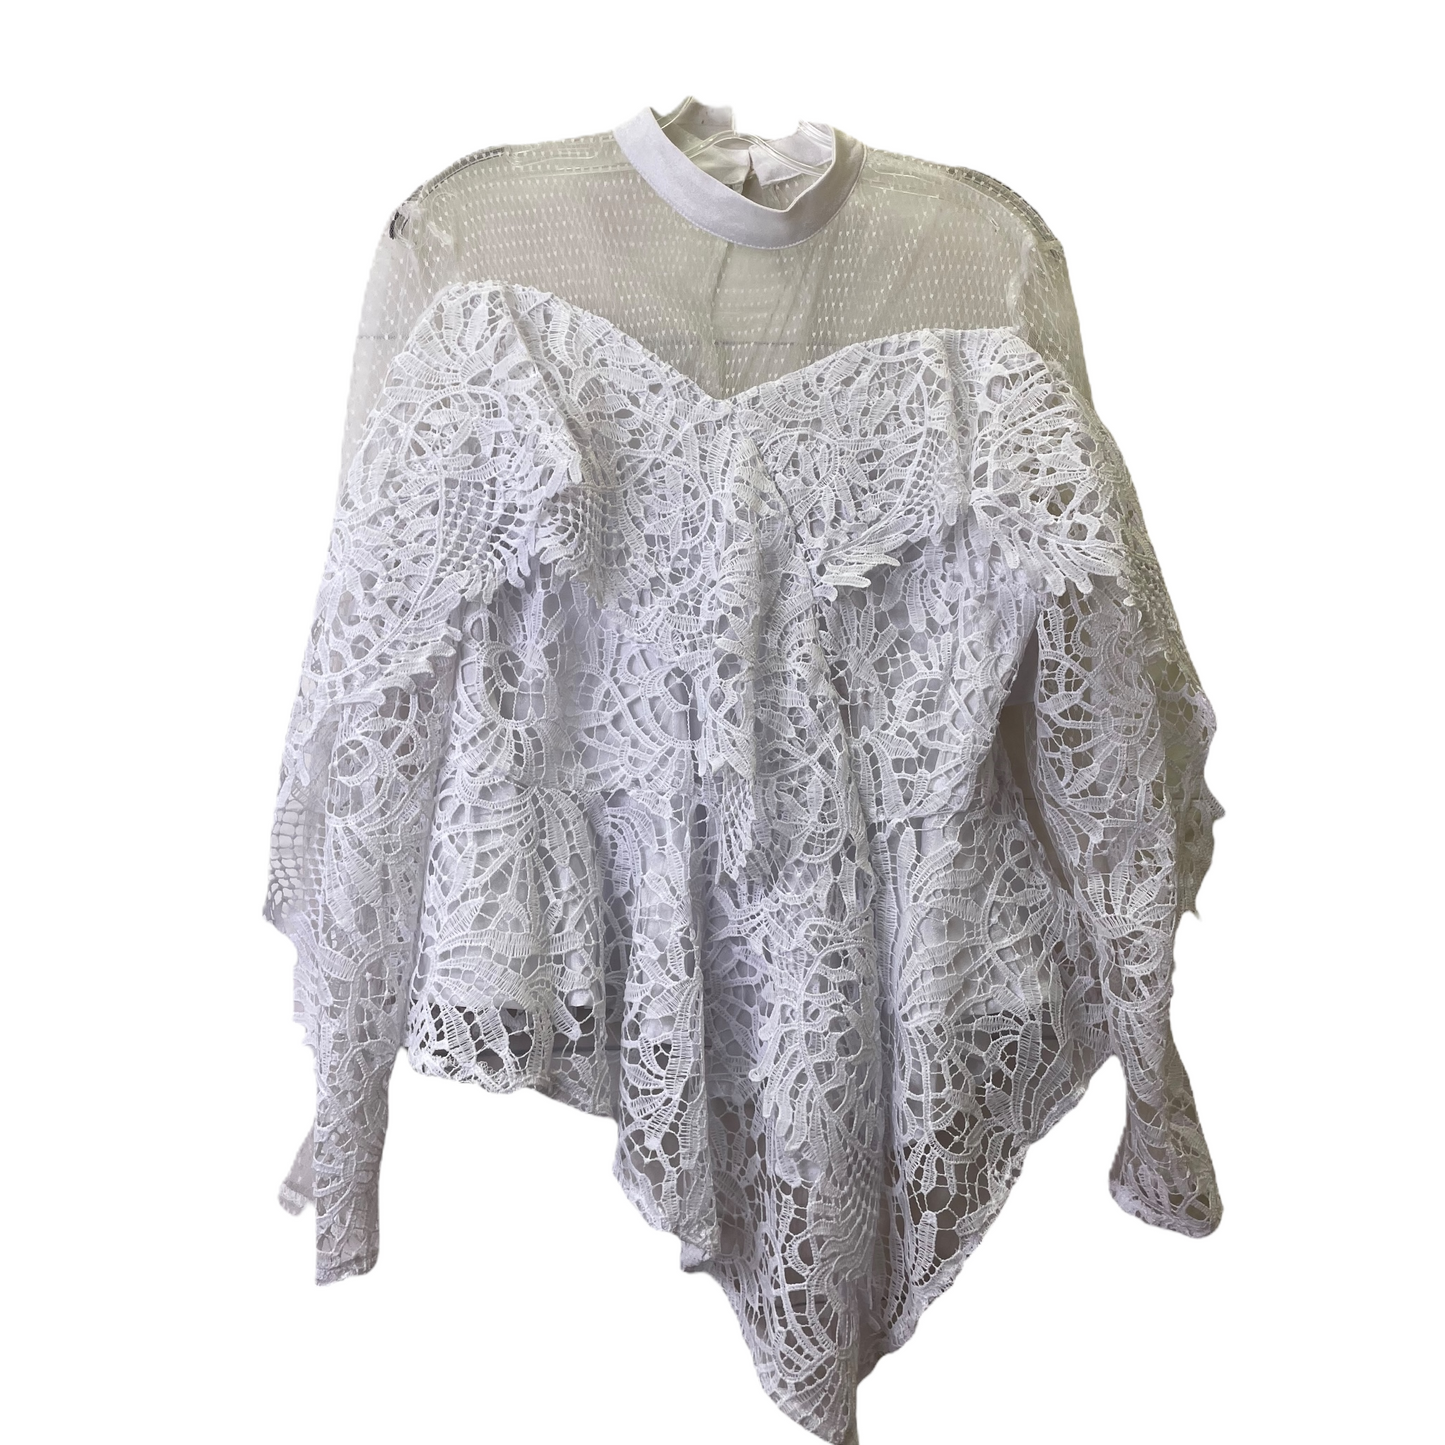 White Top Long Sleeve By ROSE COLLECTION Size: L